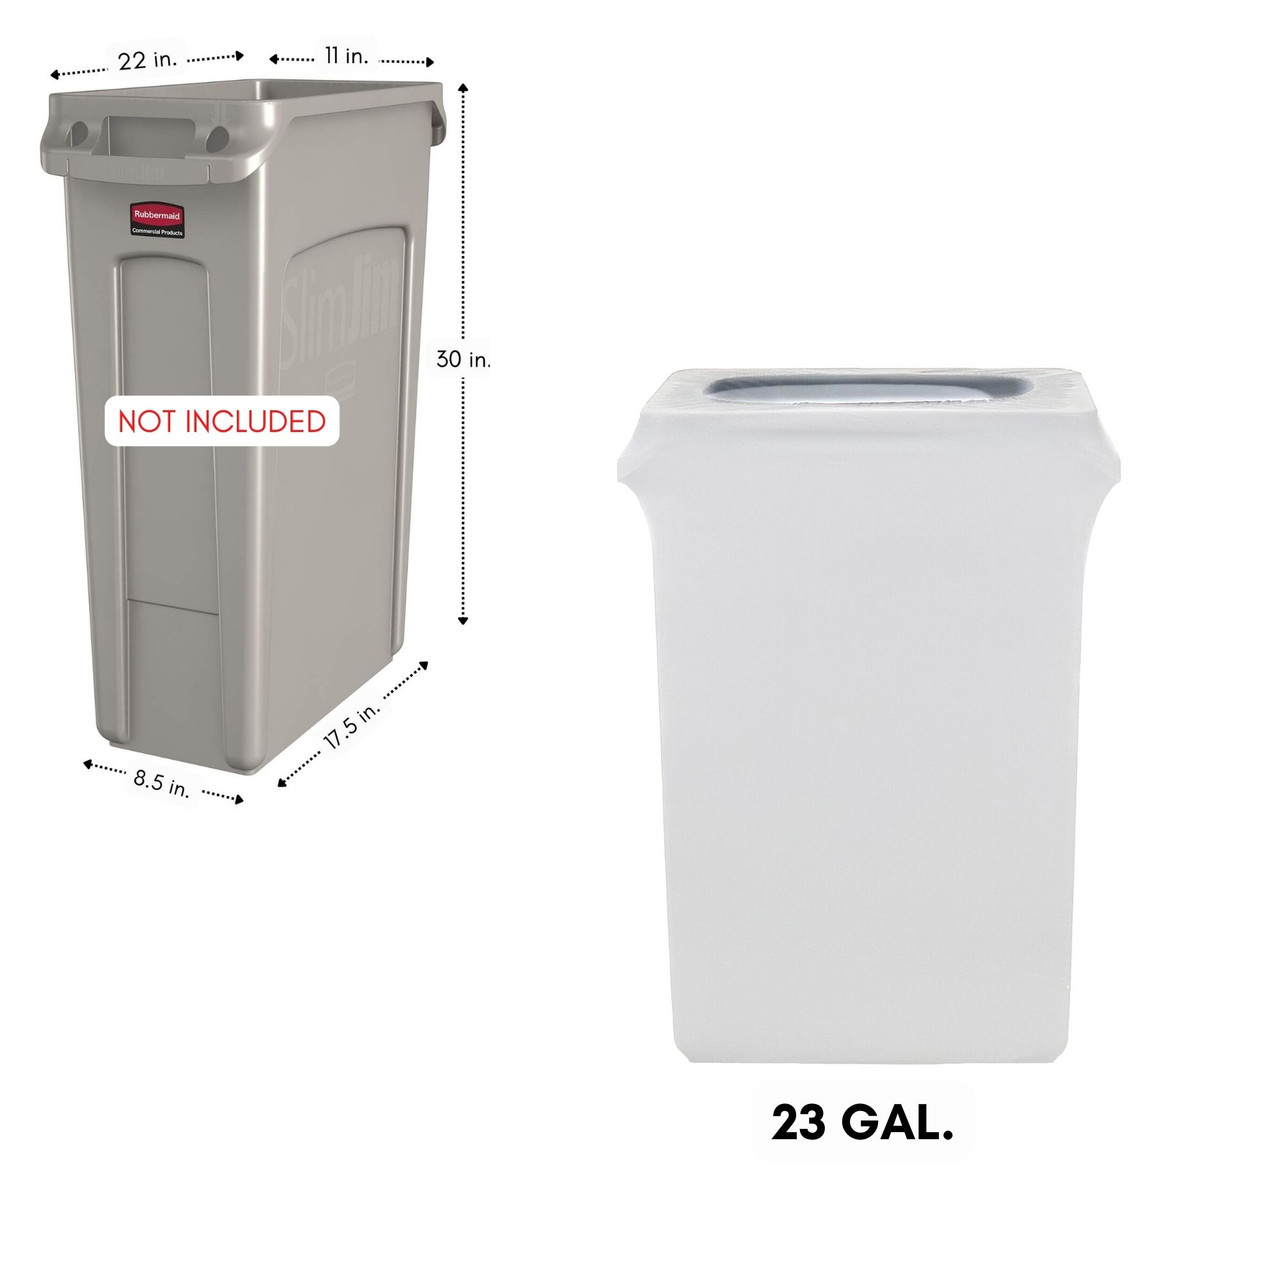 https://cdn11.bigcommerce.com/s-bch7e9/images/stencil/1280x1280/products/2193/15454/23-gal-trash-can-white-before-after__66907.1668623385.jpg?c=2